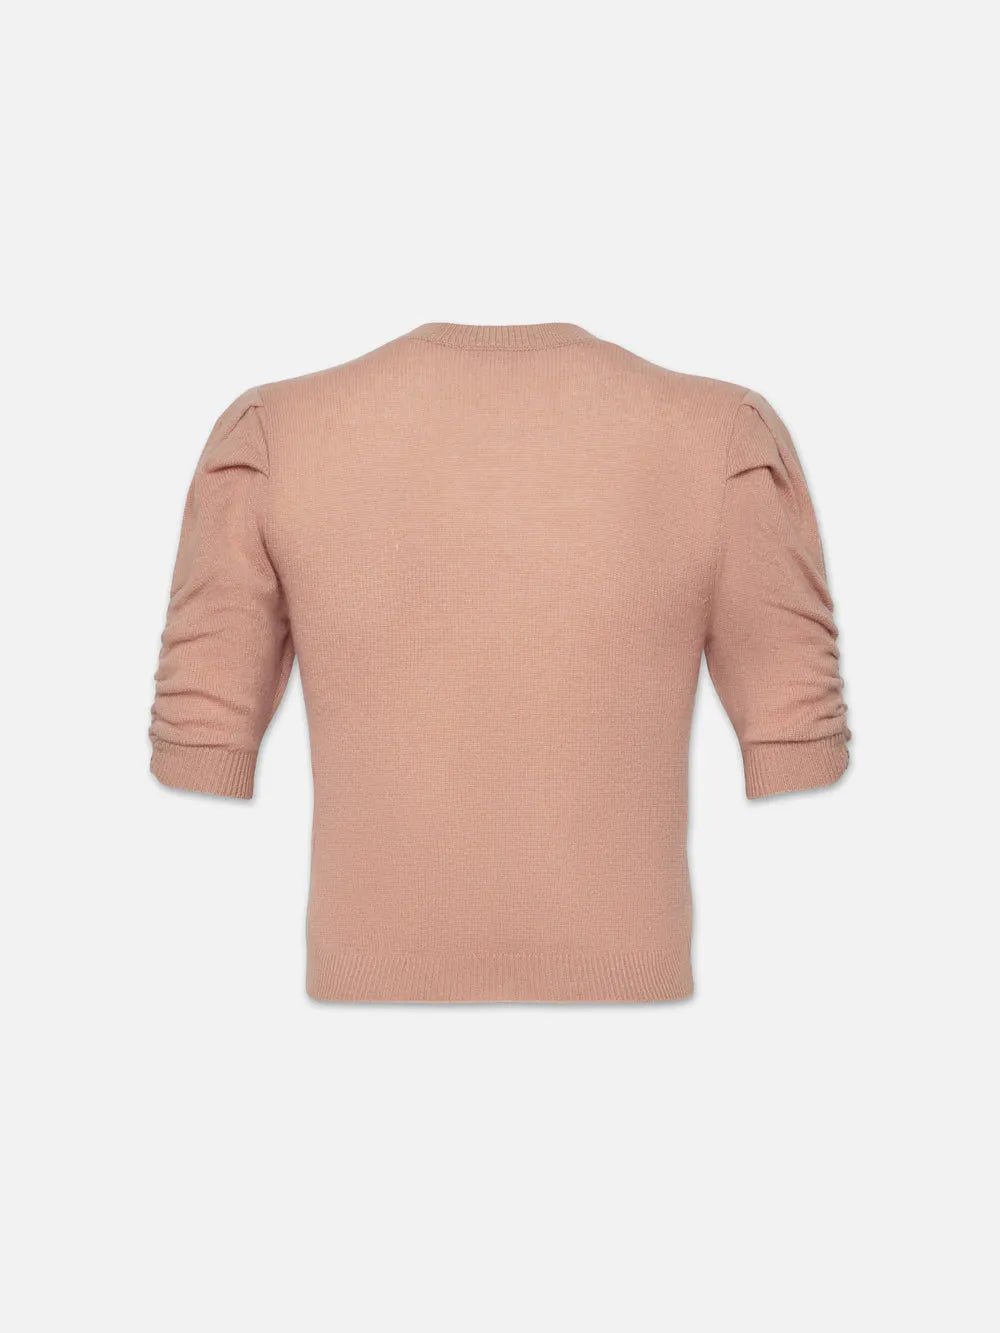 Frame Ruched Sleeve Cashmere Sweater in Blush - Estilo Boutique